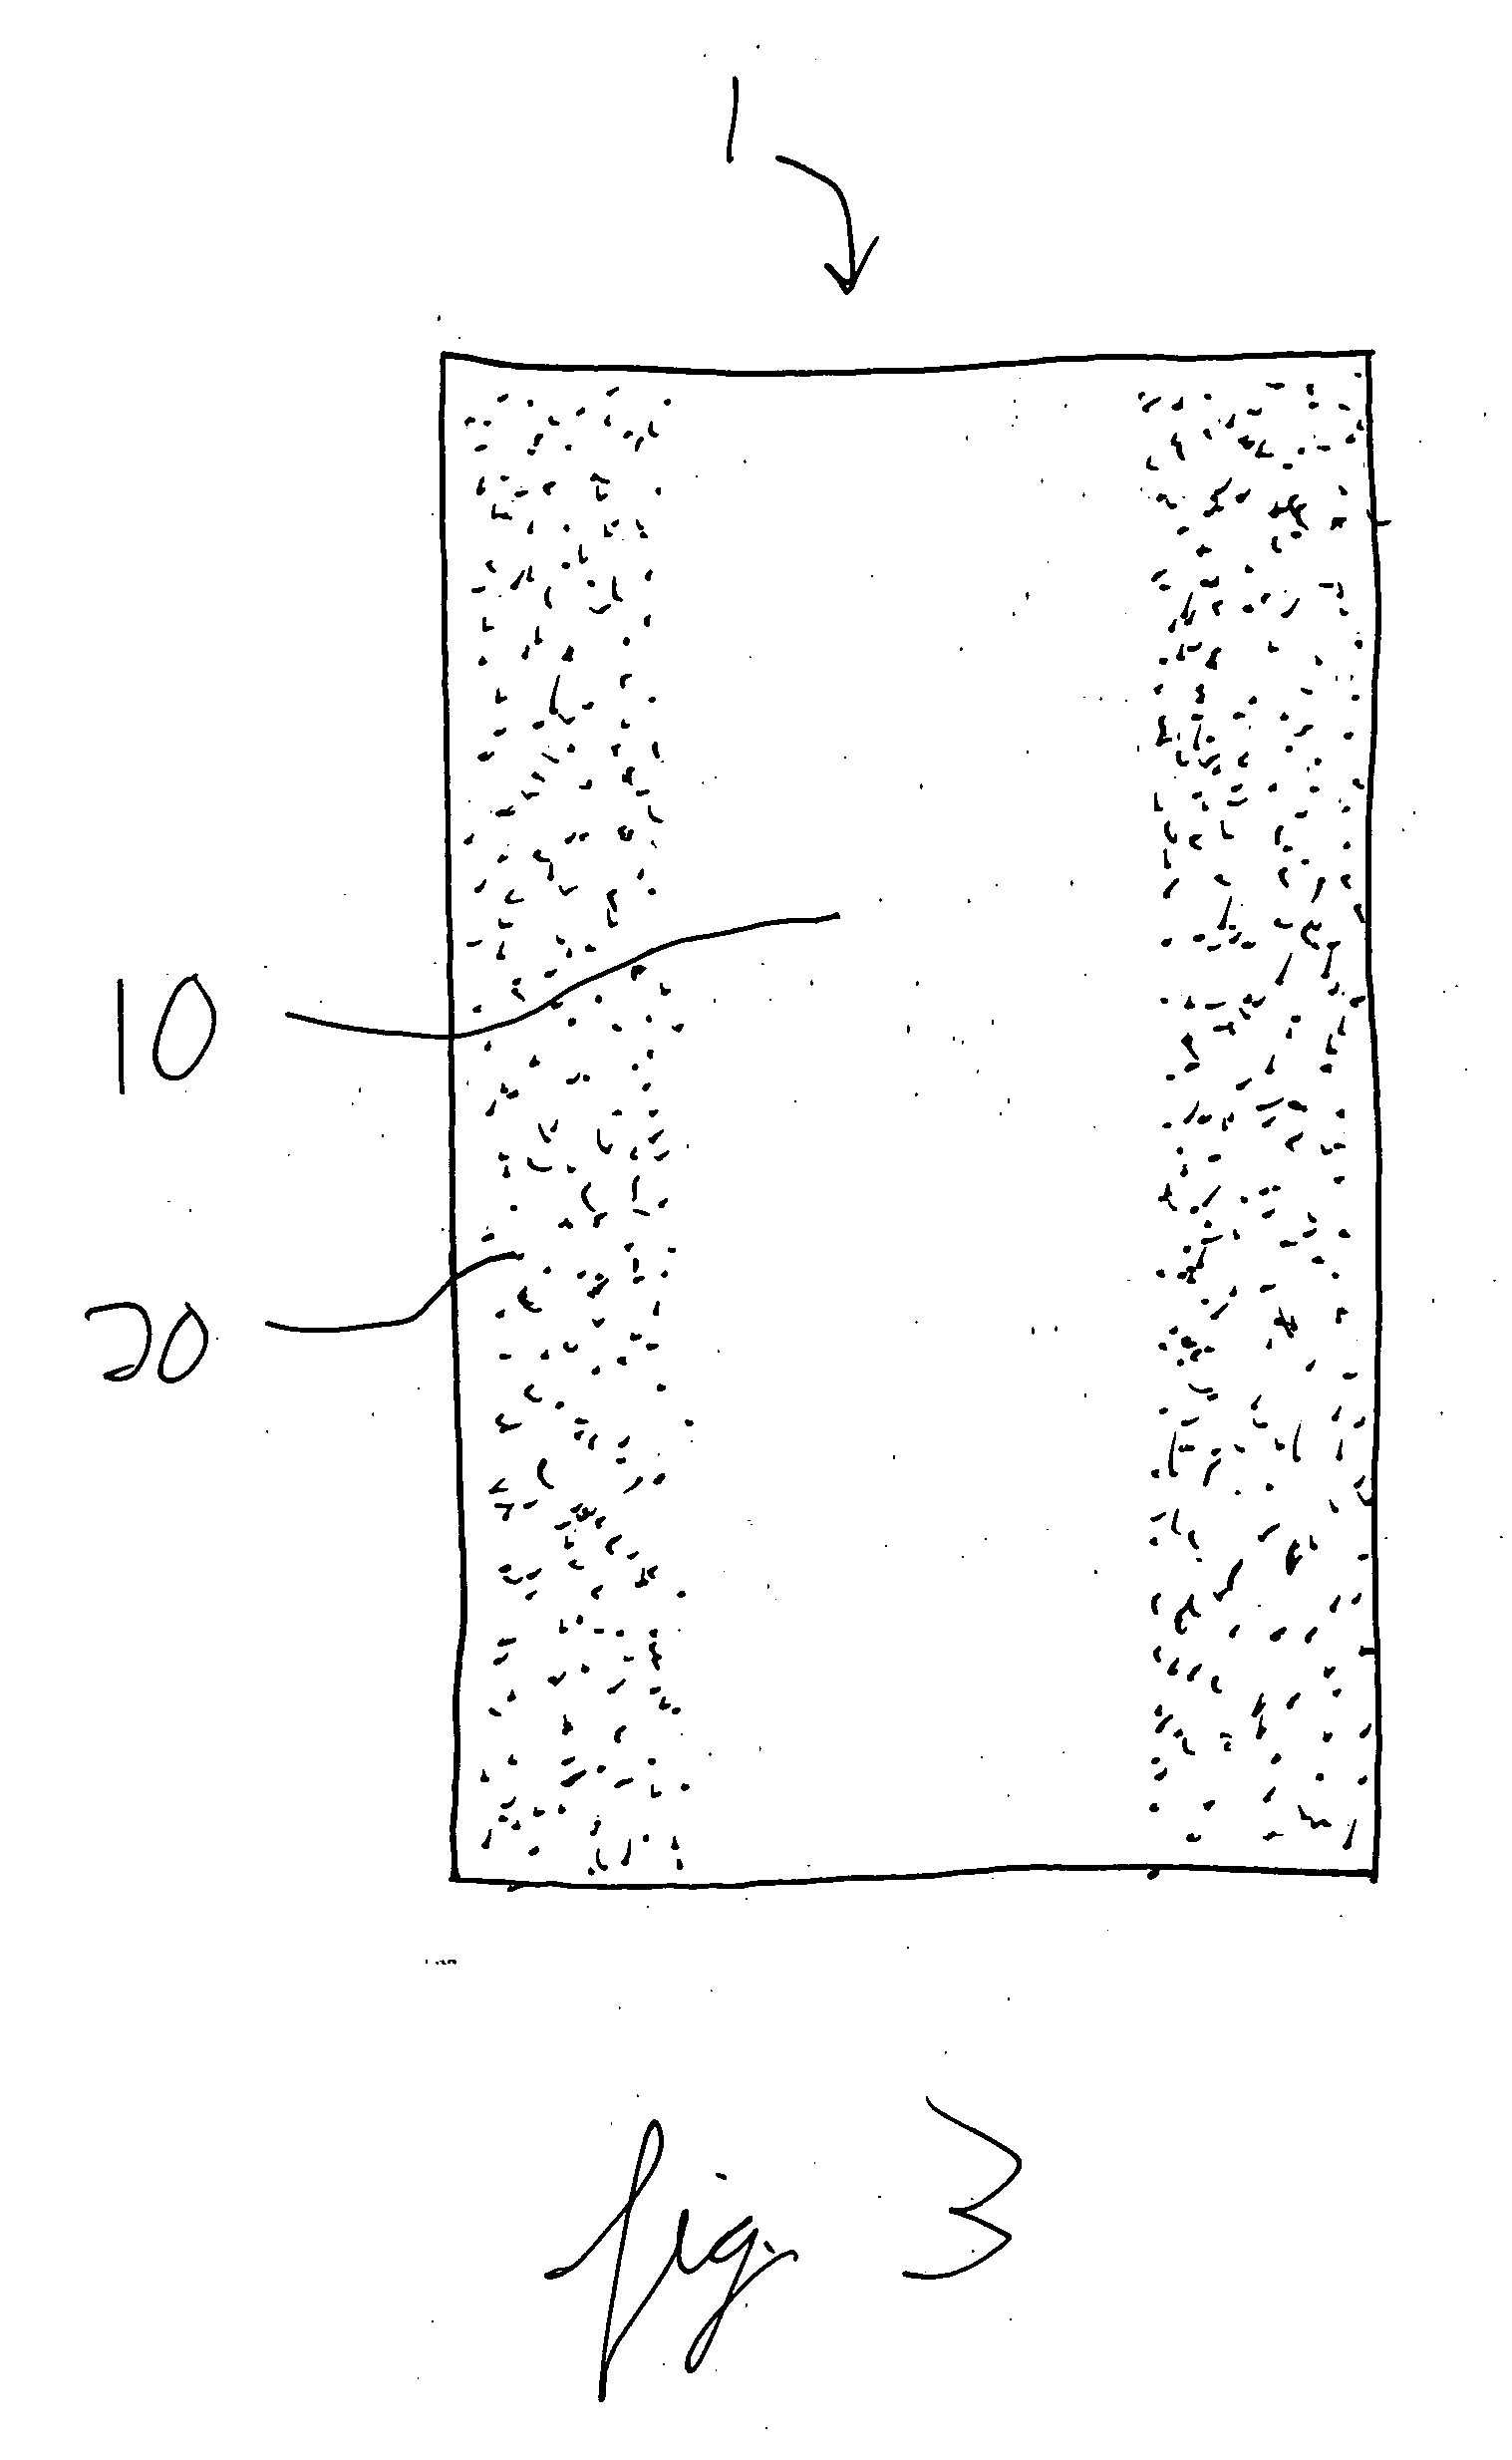 Adhesive-containing wound closure device and method